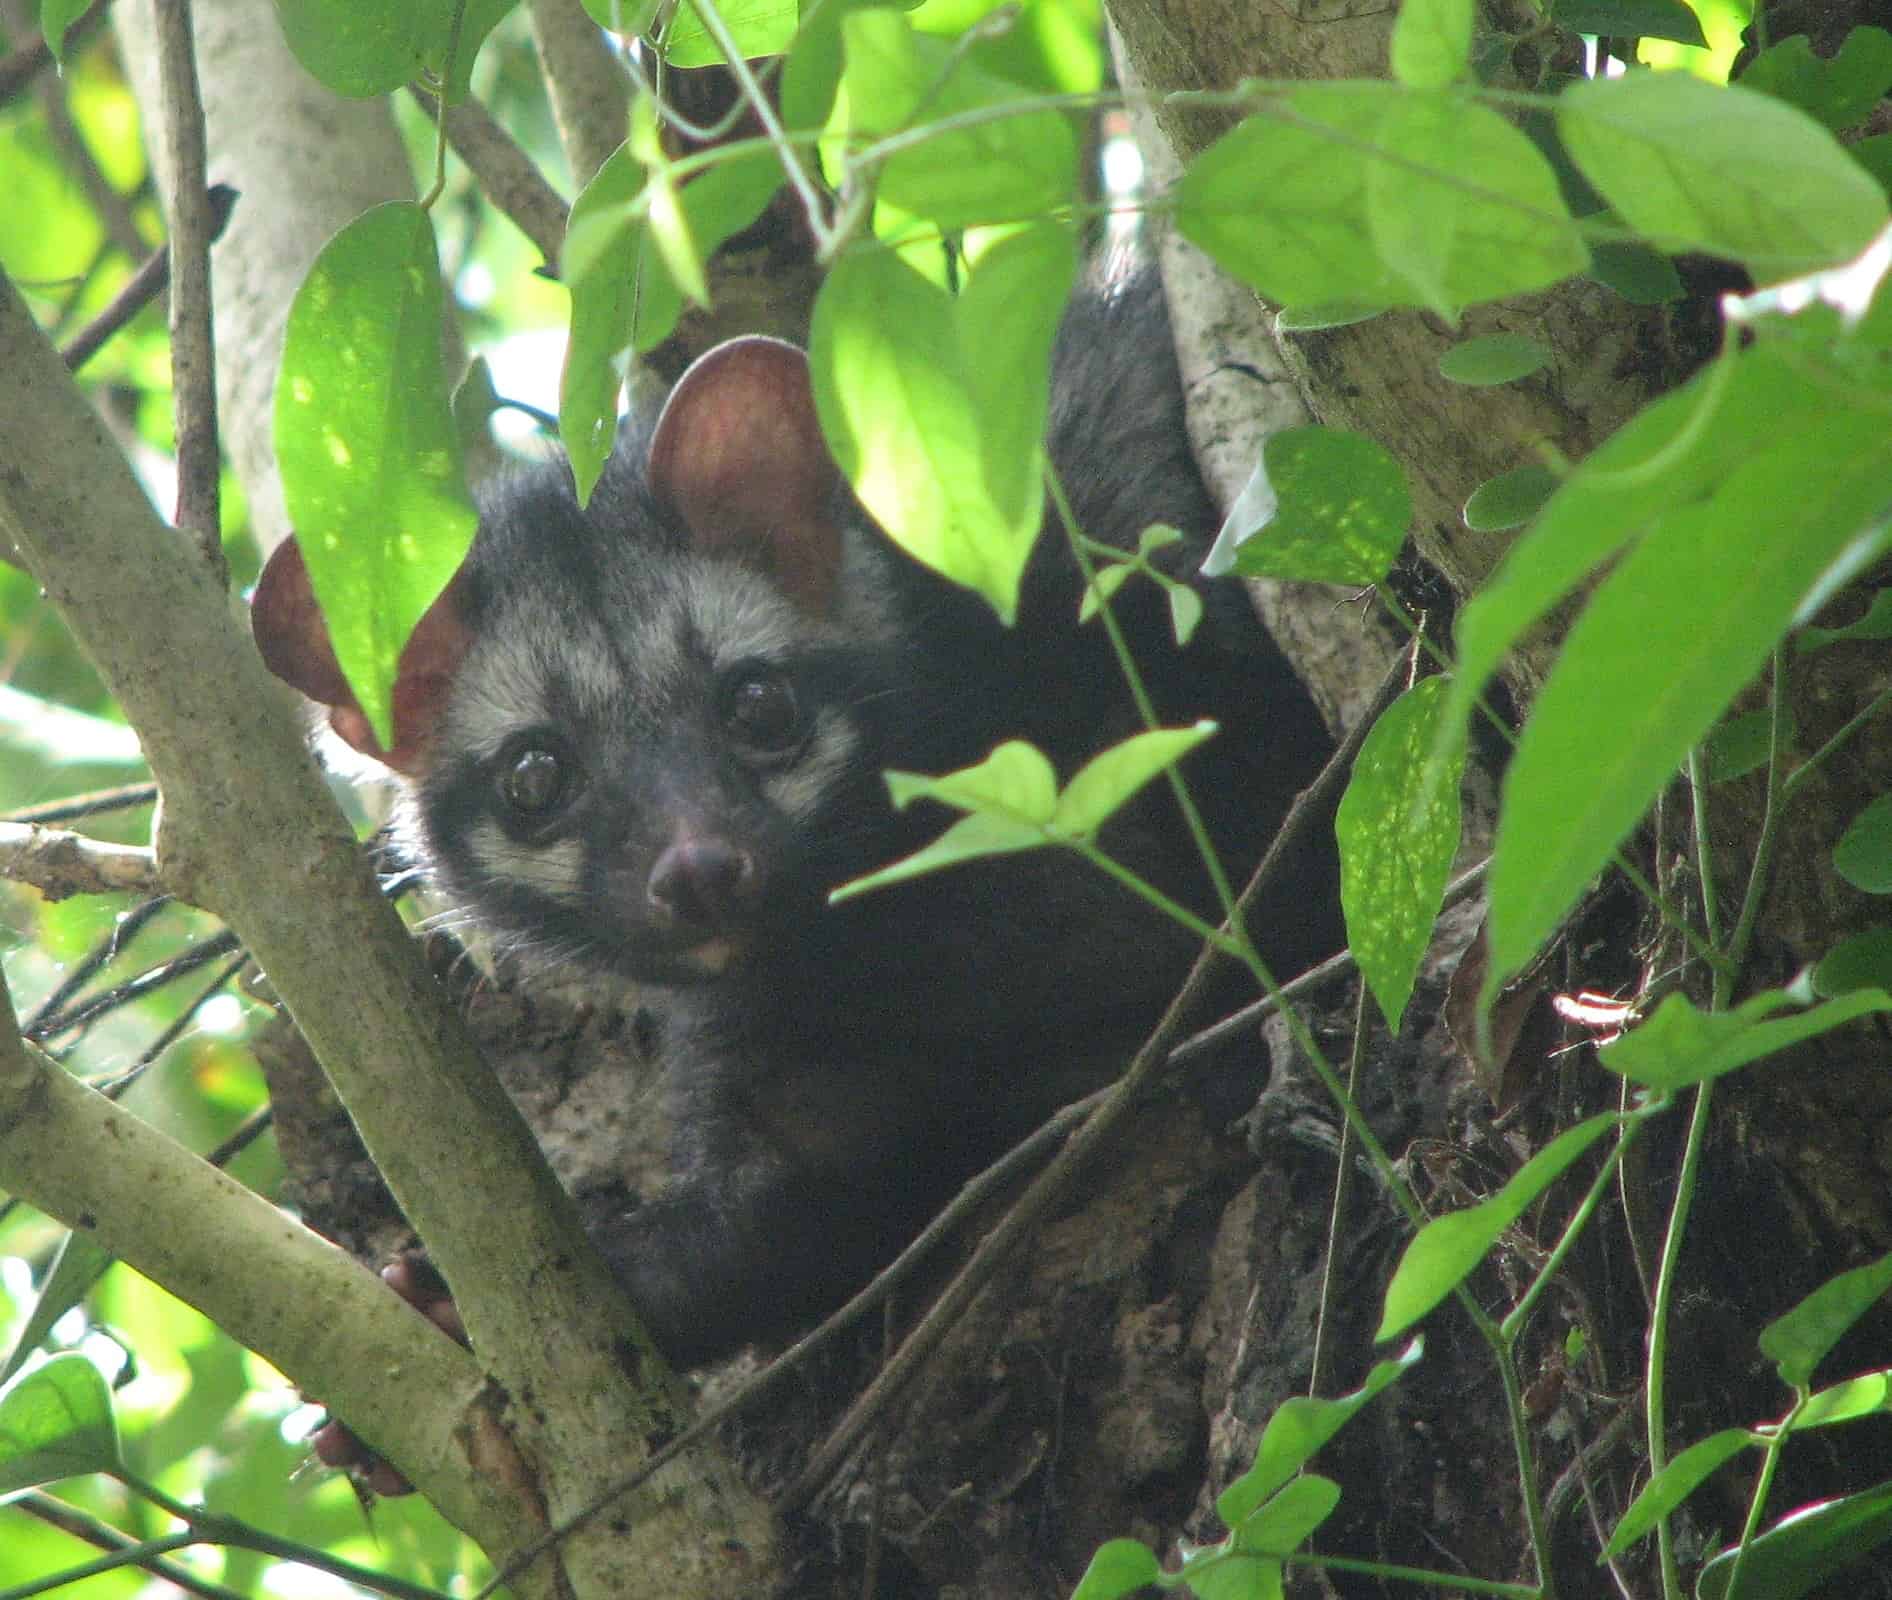 Asian Palm Civet in a tree. From Kerala, India